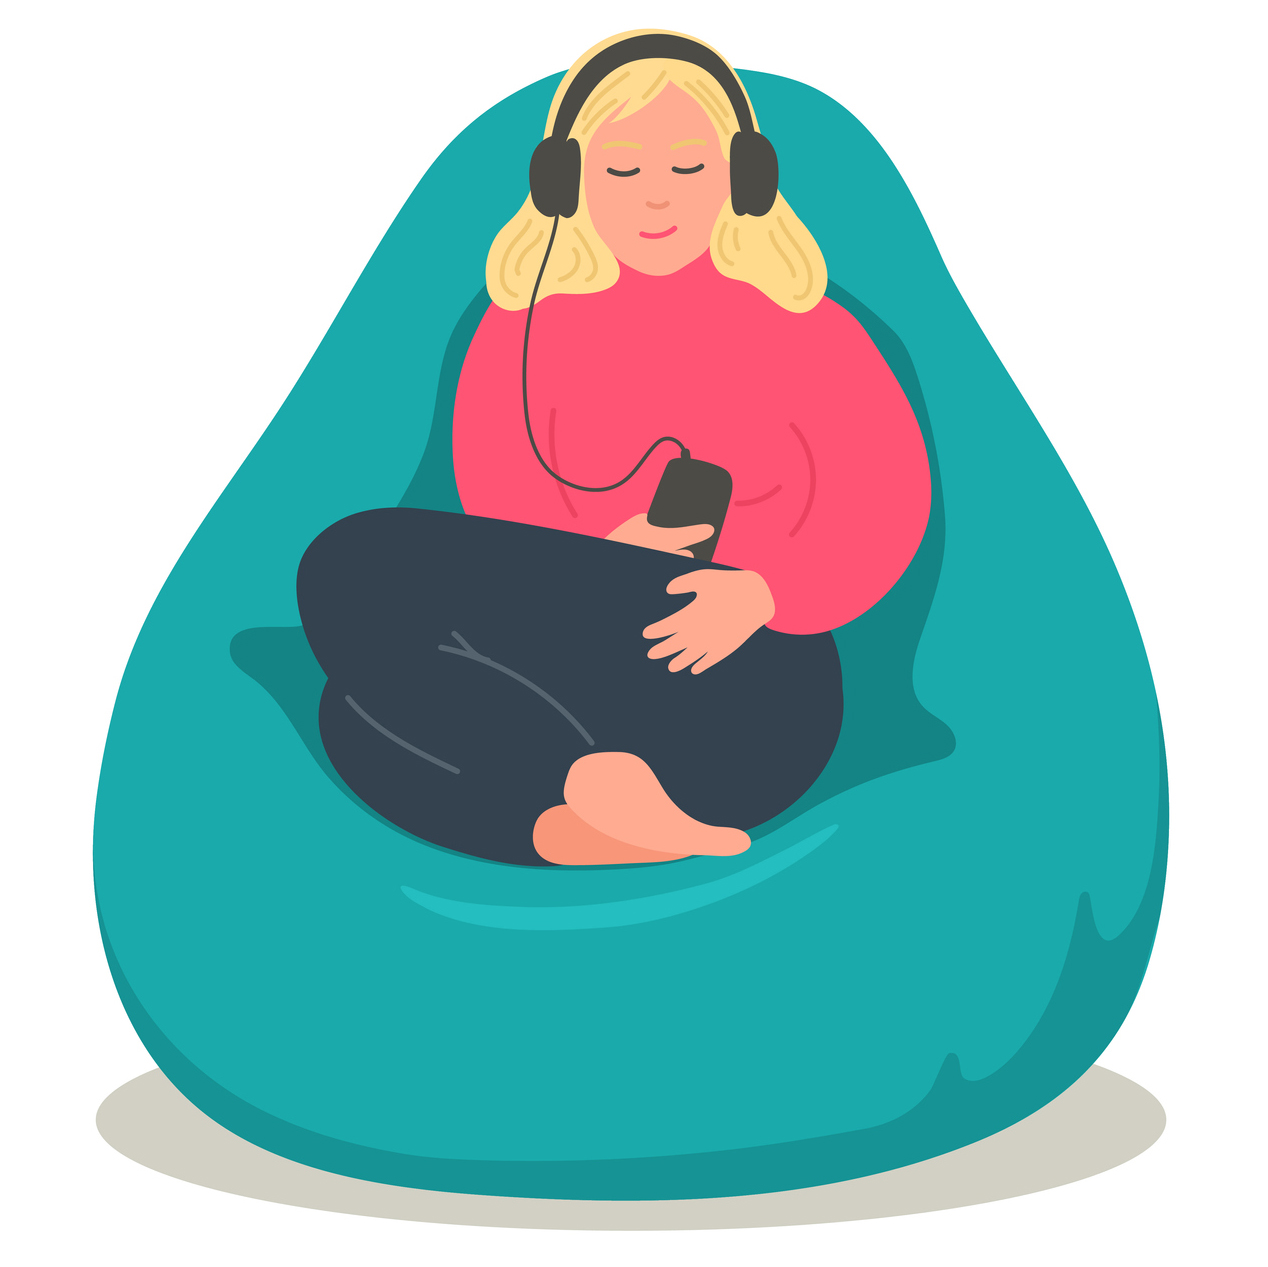 An illustrated, relaxed female character, in a beanbag, listening to a podcast